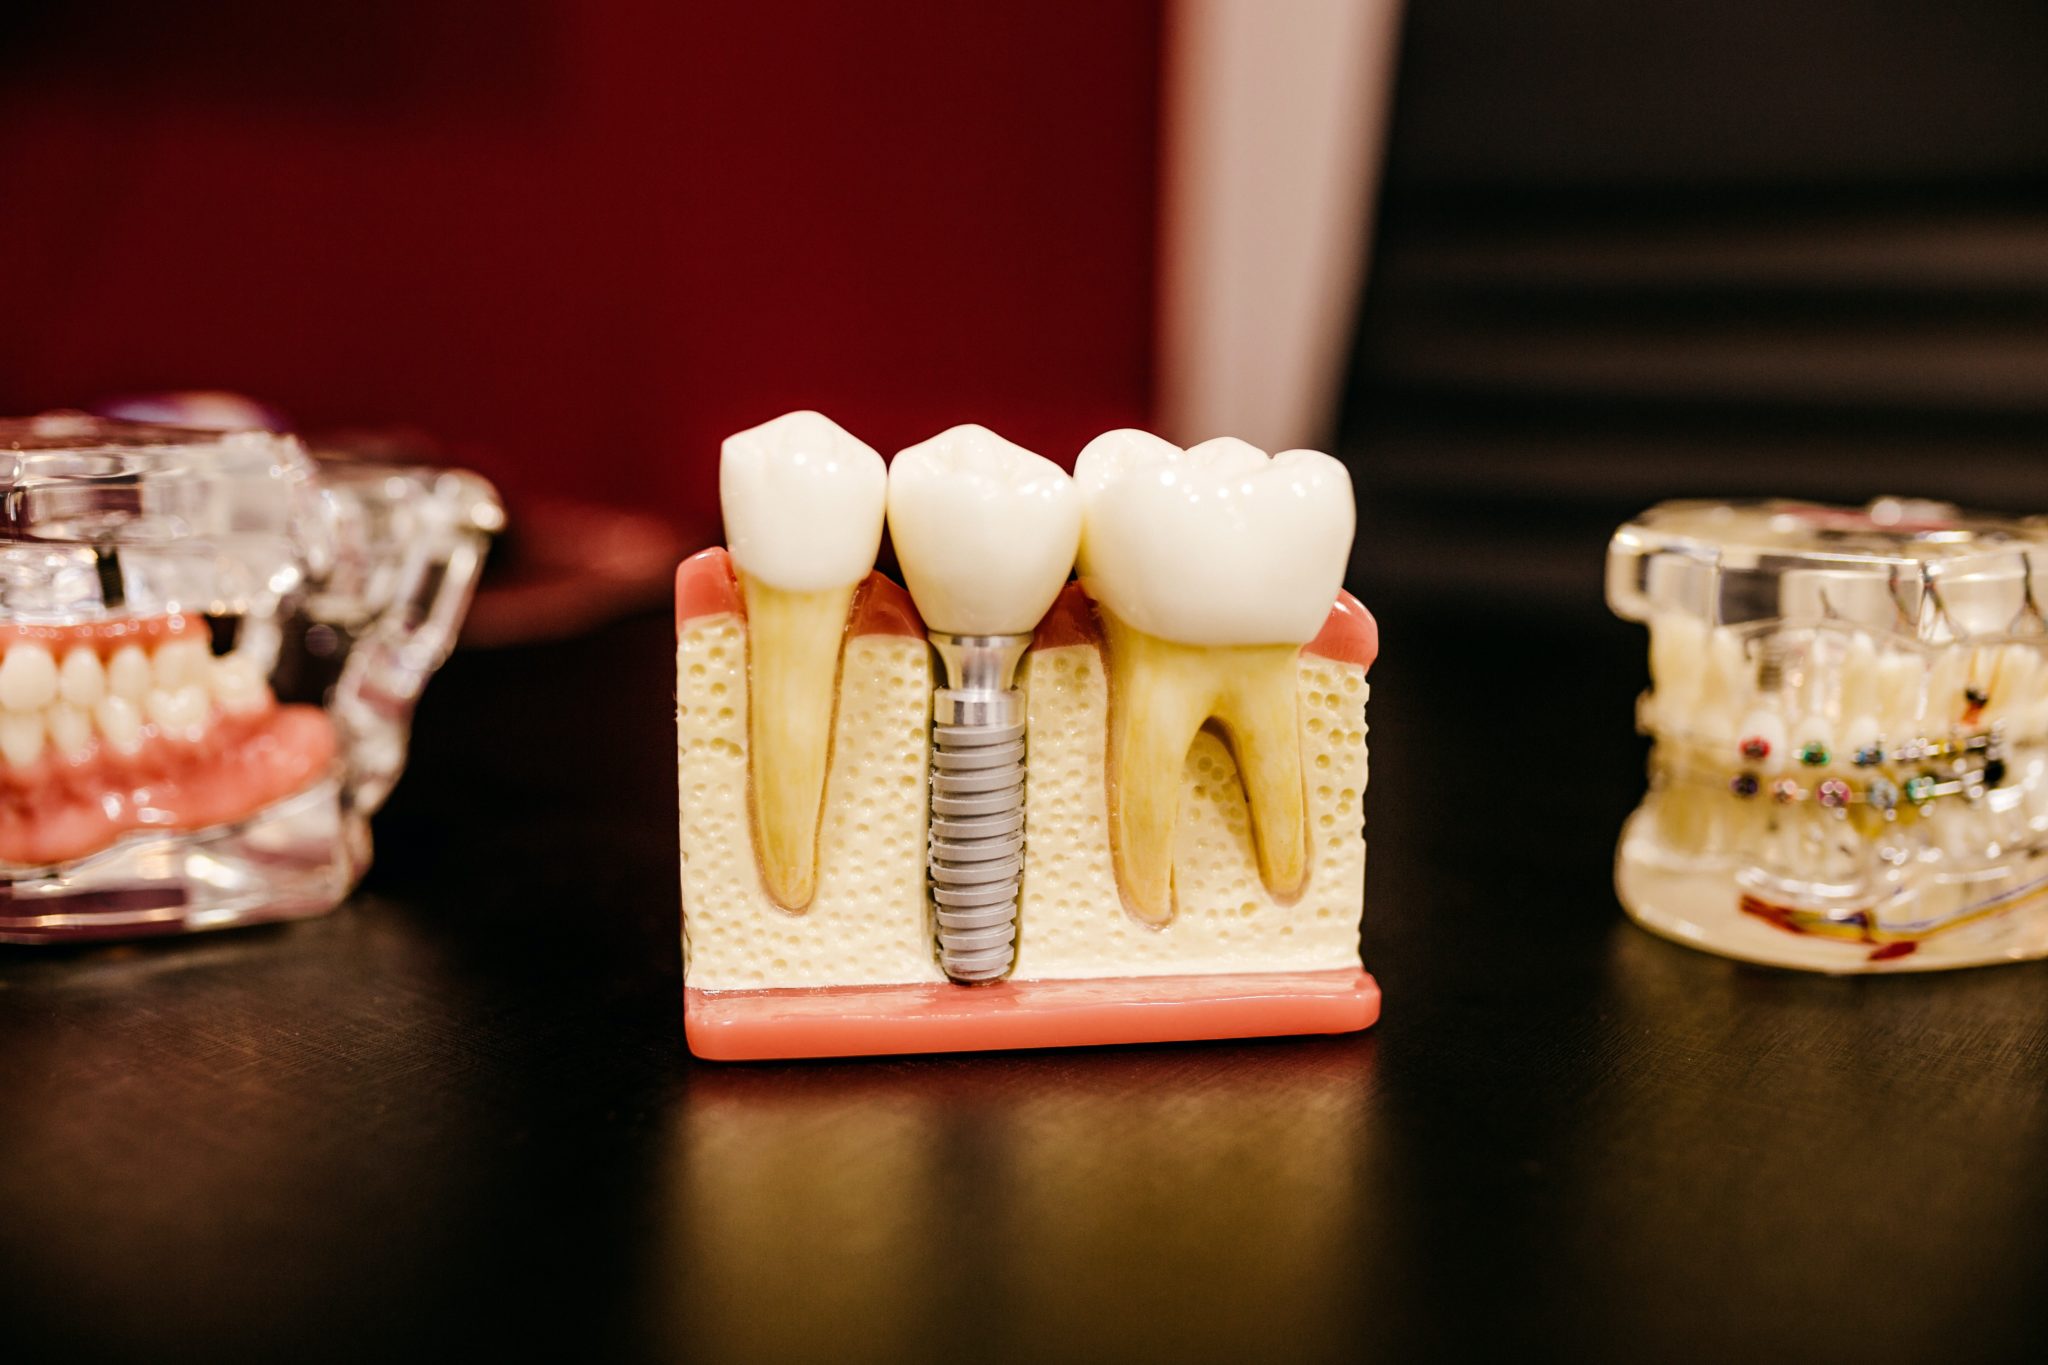 implant model displayed in a dentist's desk showing the replica of 2 teeth with 1 implant crown between them